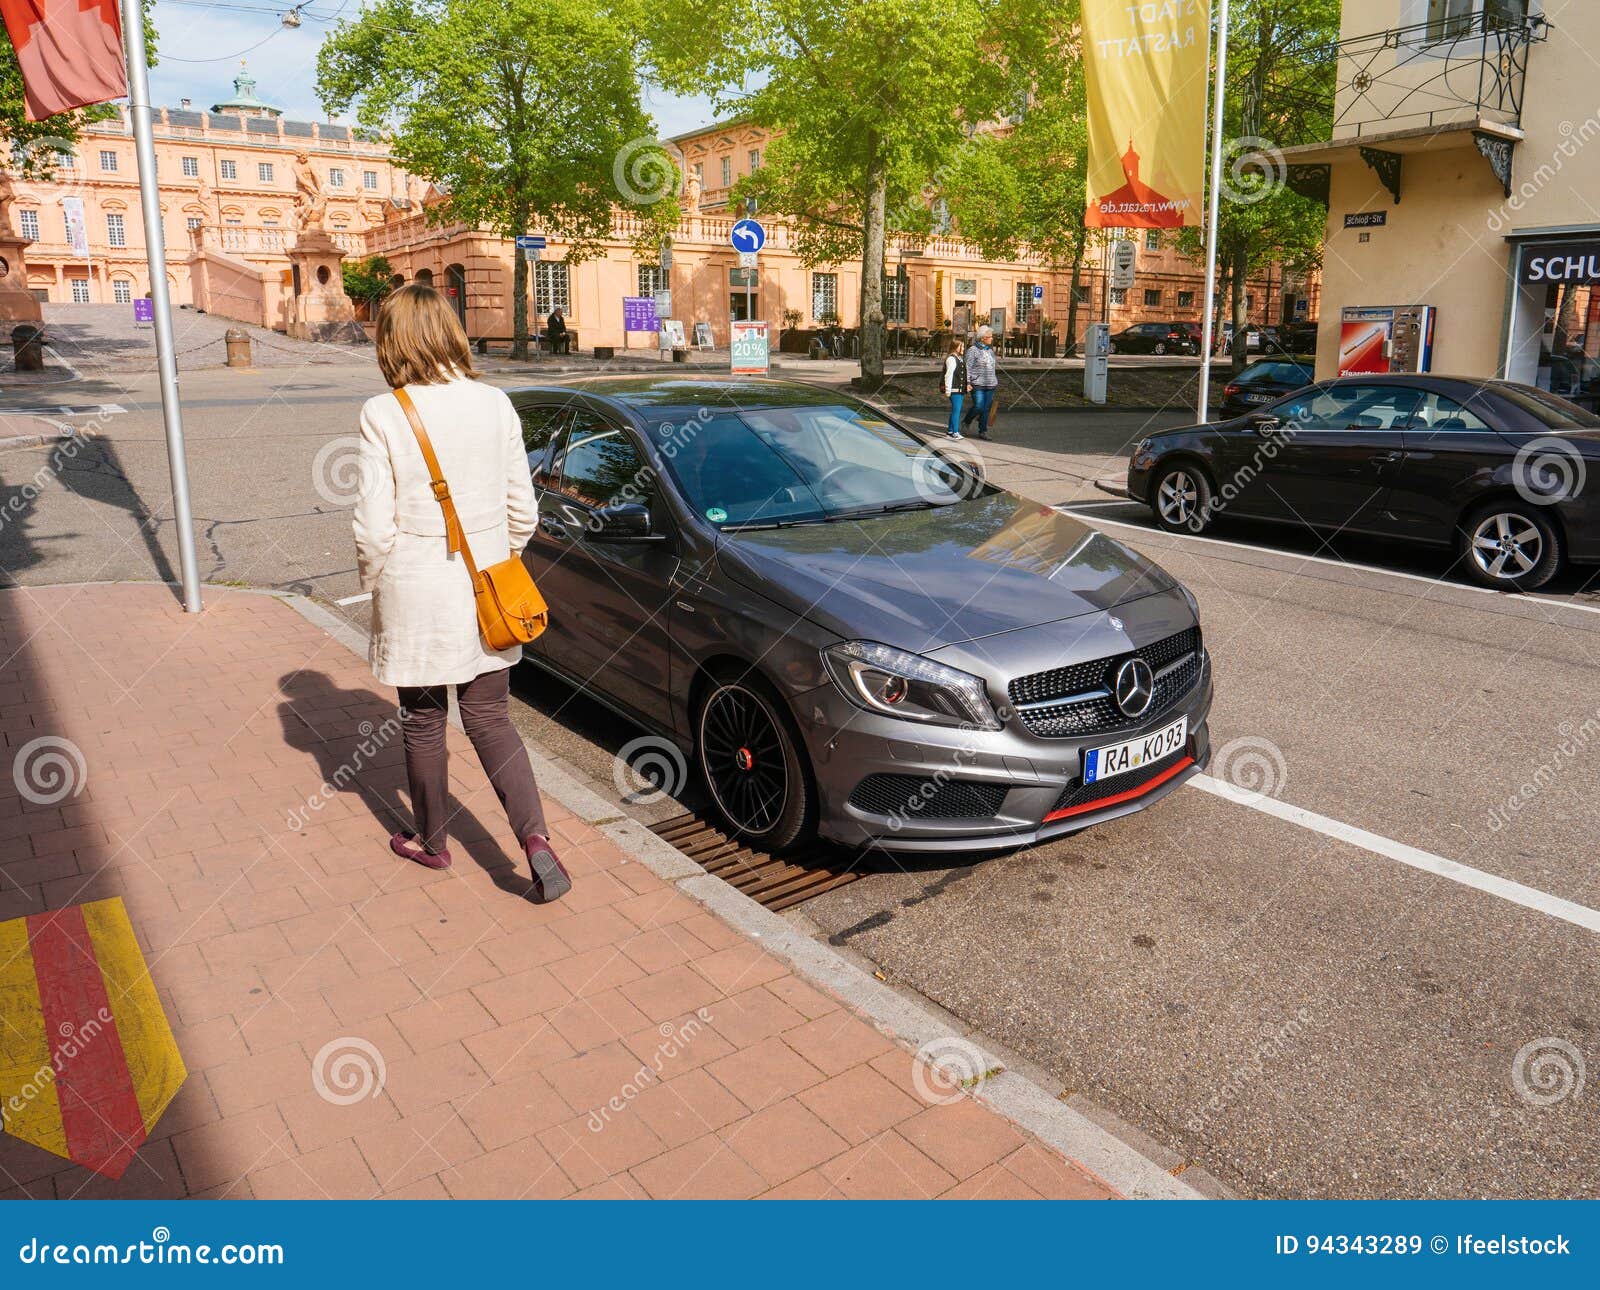 Mercedes-benz a-Class Car Parked Woman Walking Nearby Editorial